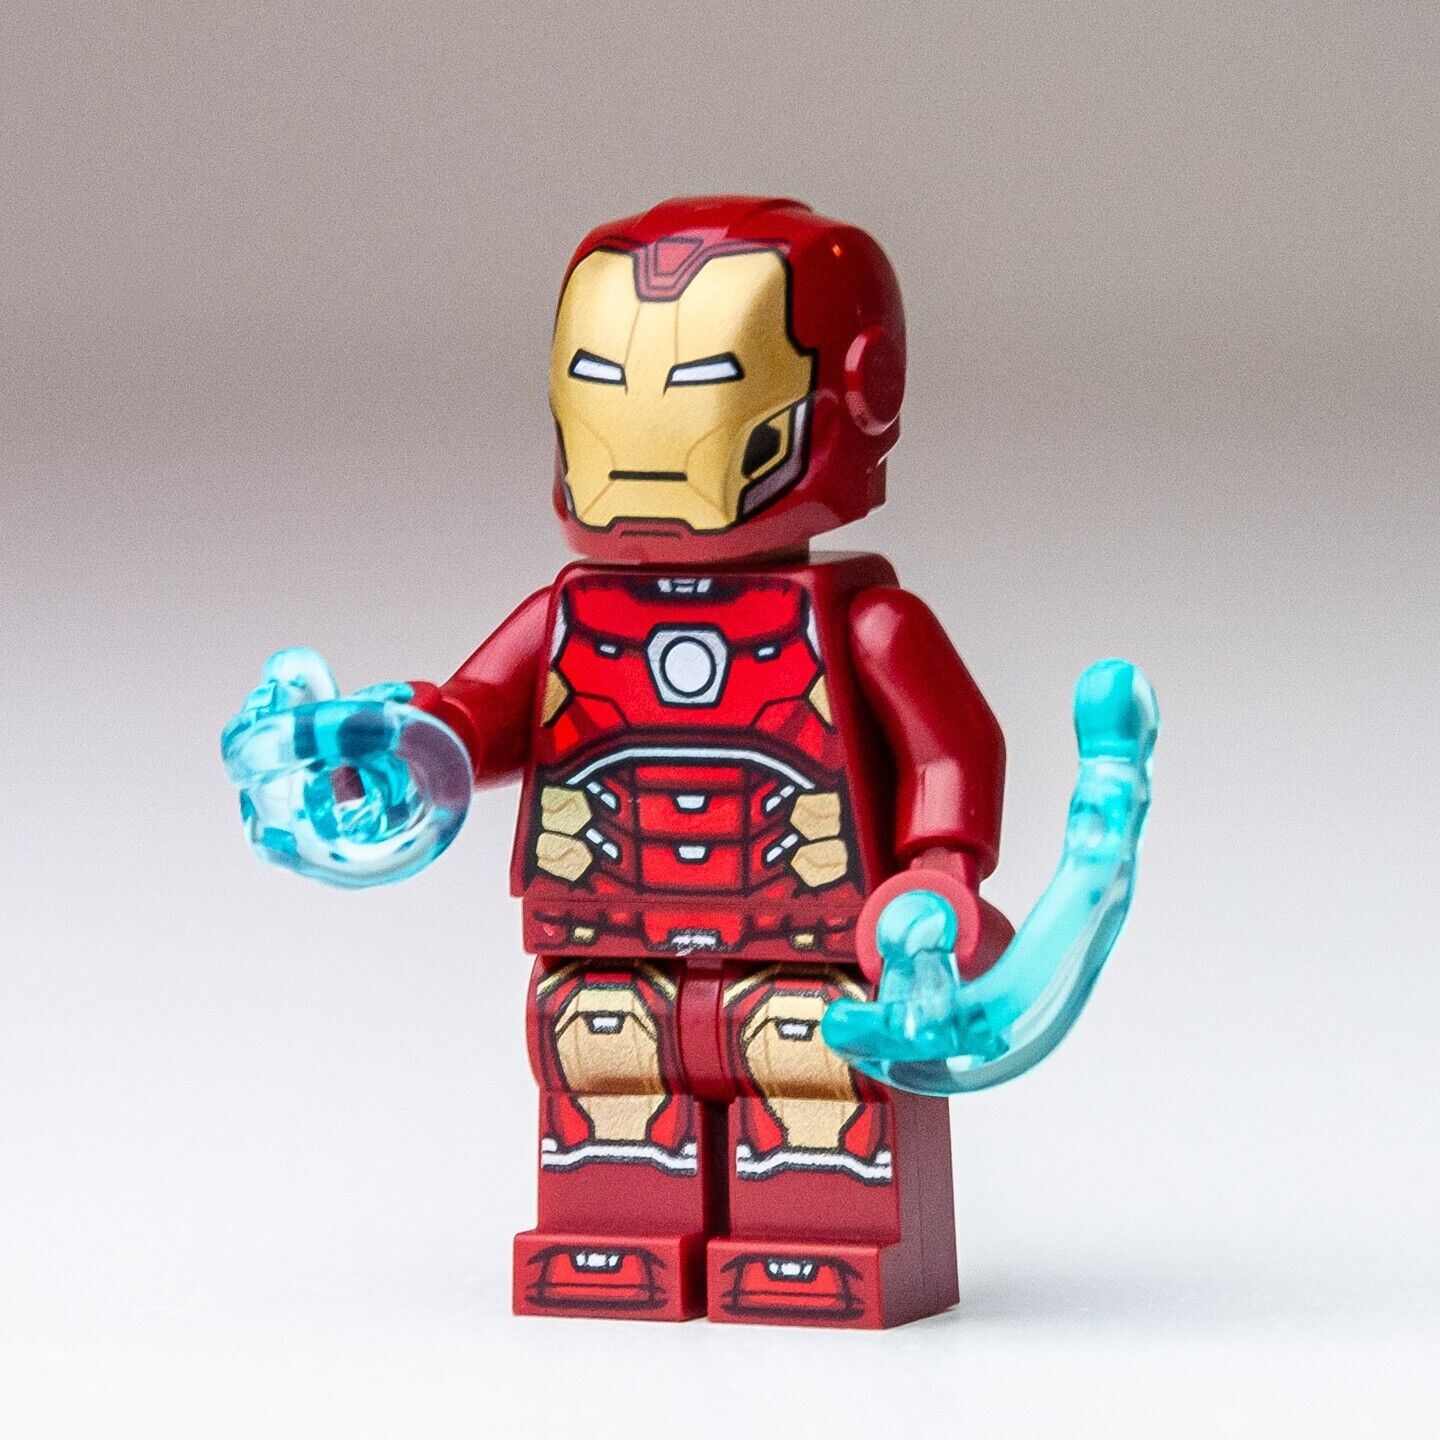 New LEGO Iron Man with Silver Hexagon on Chest Minifigure - Marvel Avengers